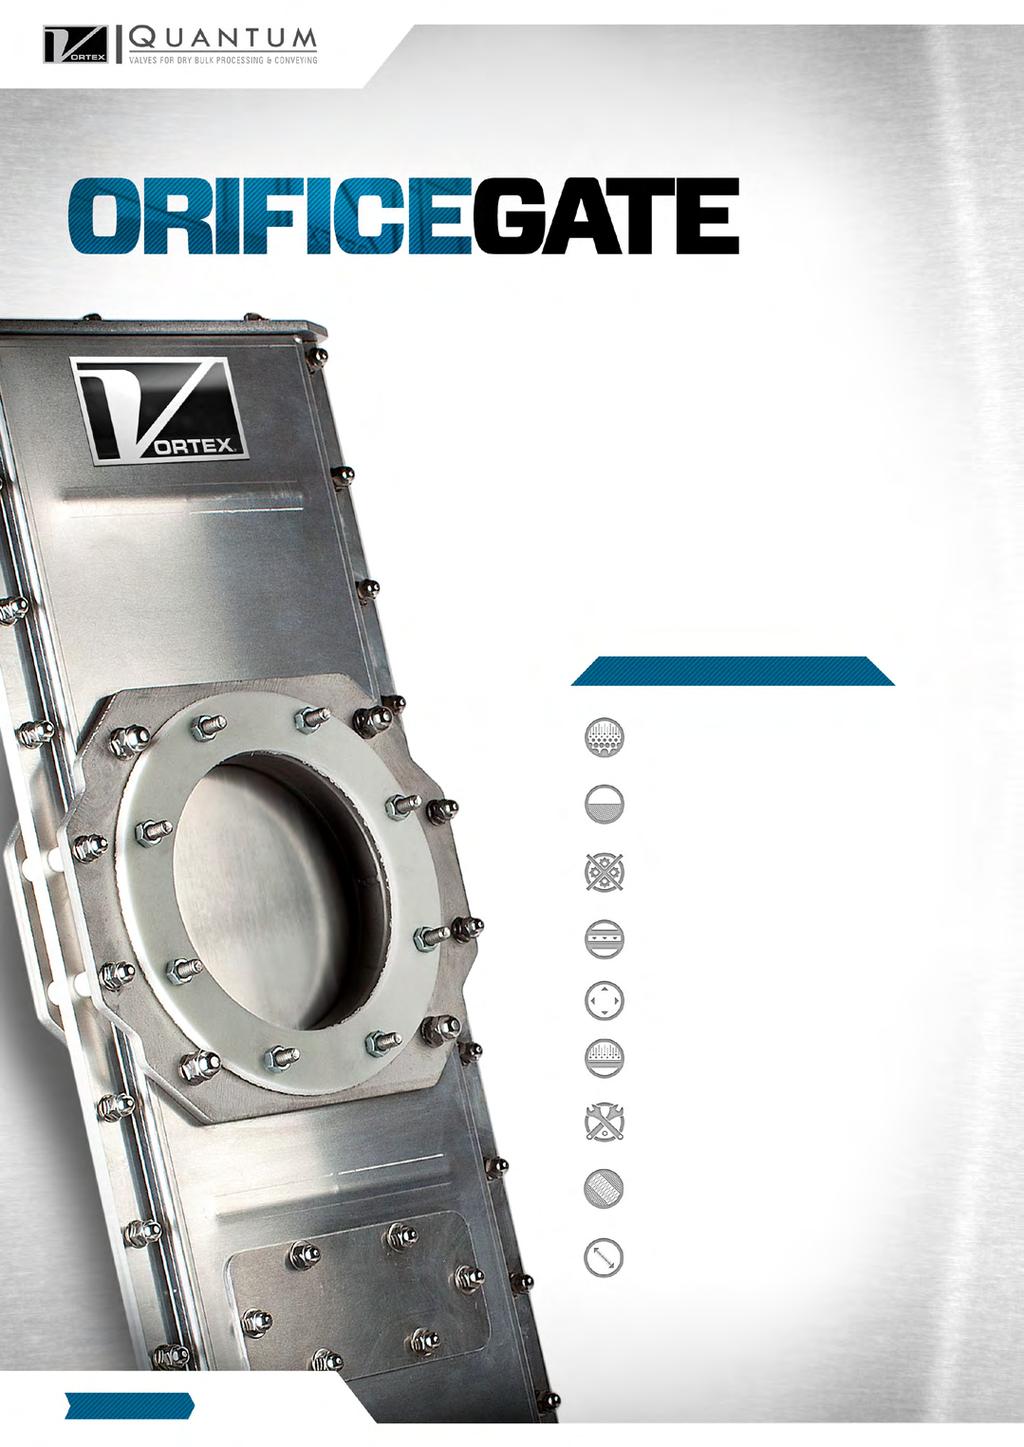 The Vortex Quantum Orifice Gate is specifically engineered to handle dry bulk solids in gravity flow, dilute phase, or vacuum conveying systems with pressures up to 15 psig (1 barg).